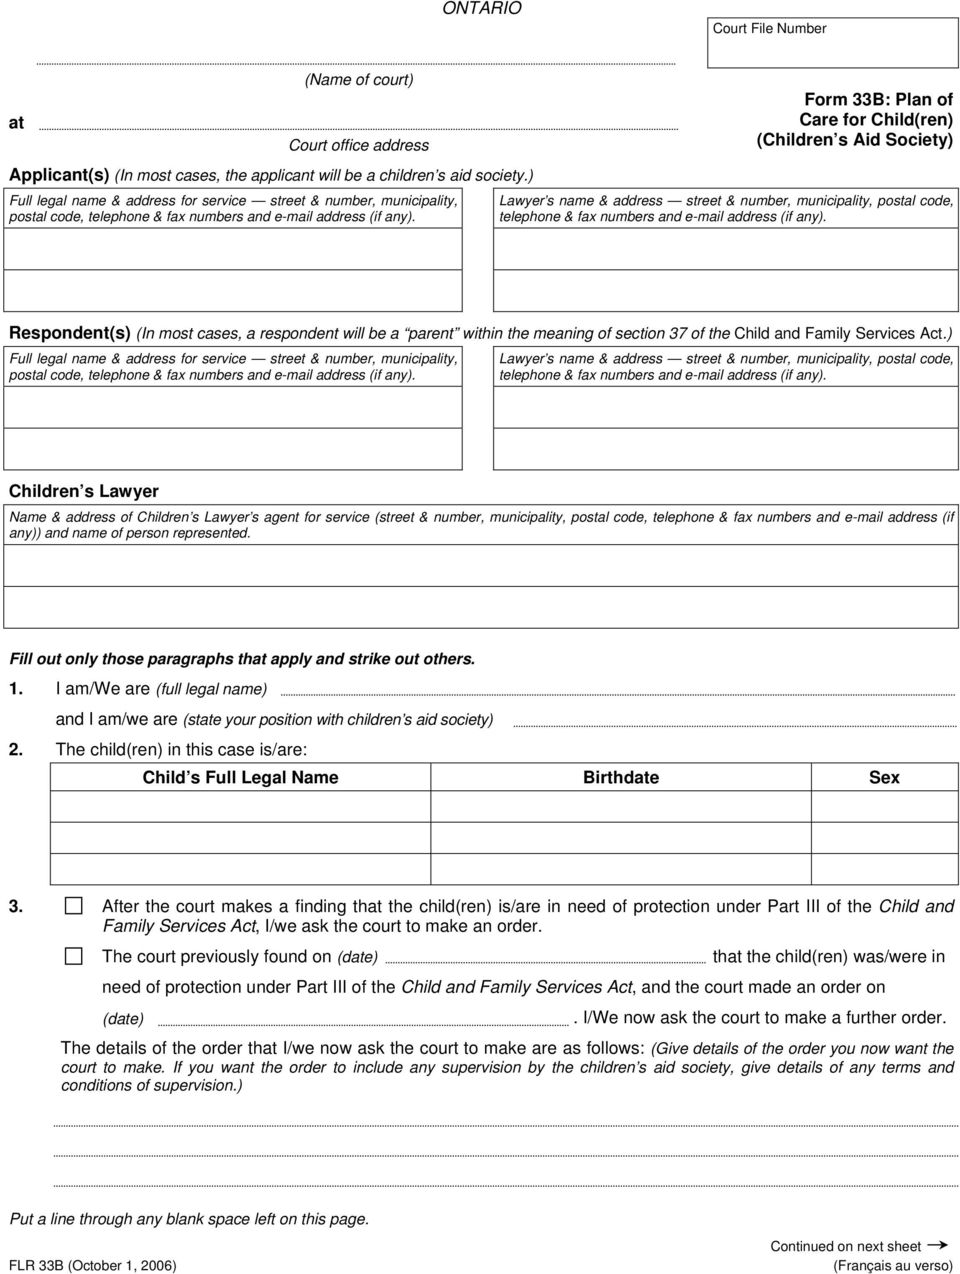 Form 33B: Plan of Care for Child(ren) (Children s Aid Society) Lawyer s name & address street & number, municipality, postal code, telephone & fax numbers and e-mail address (if any).